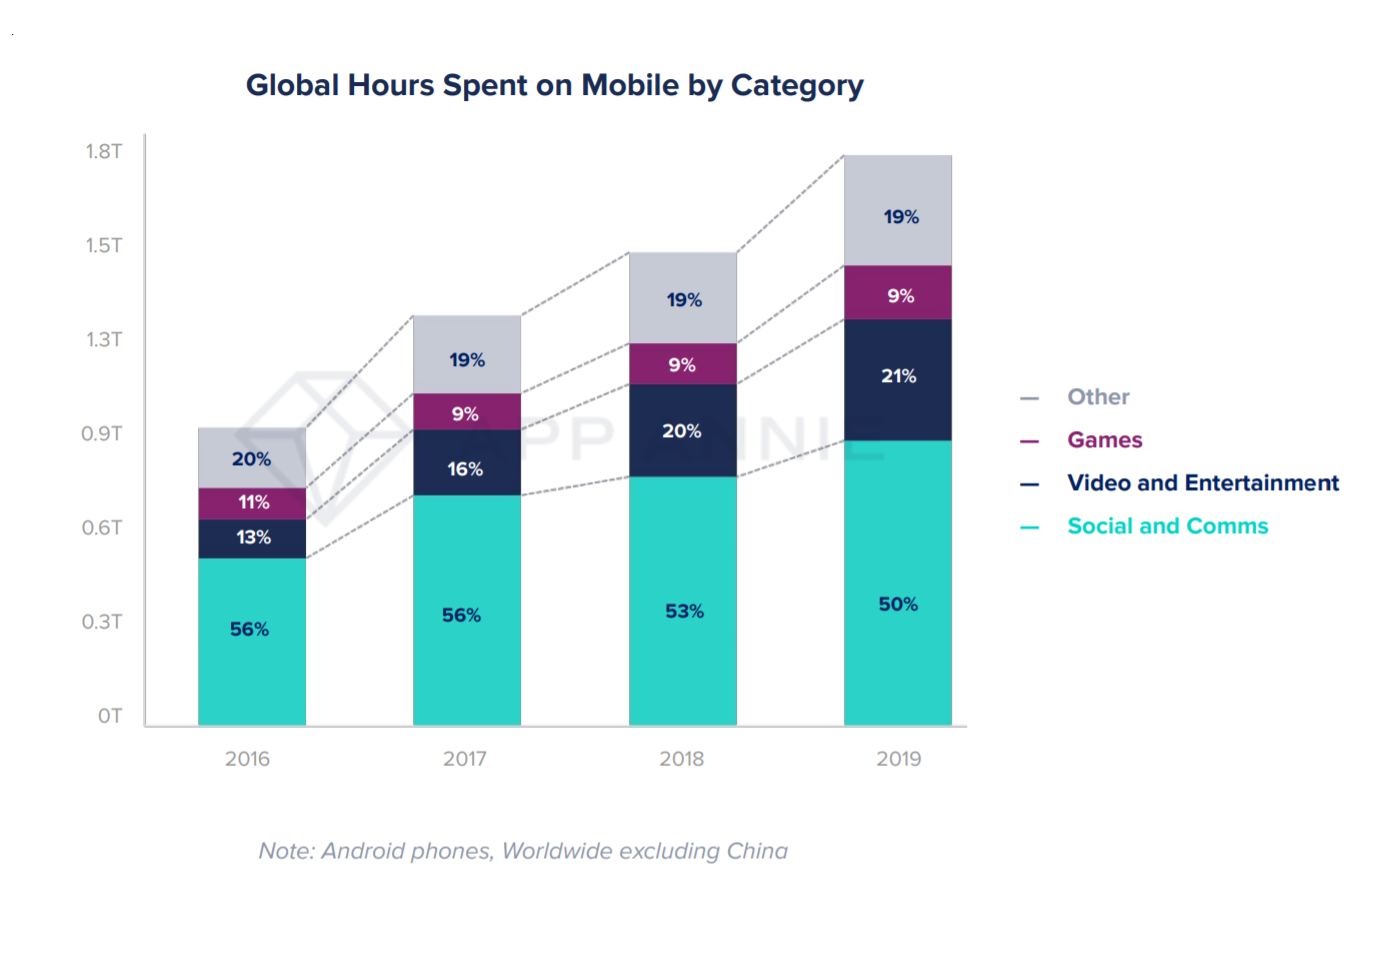 50% of Time Spent on Mobile Is in Social and Comms Category